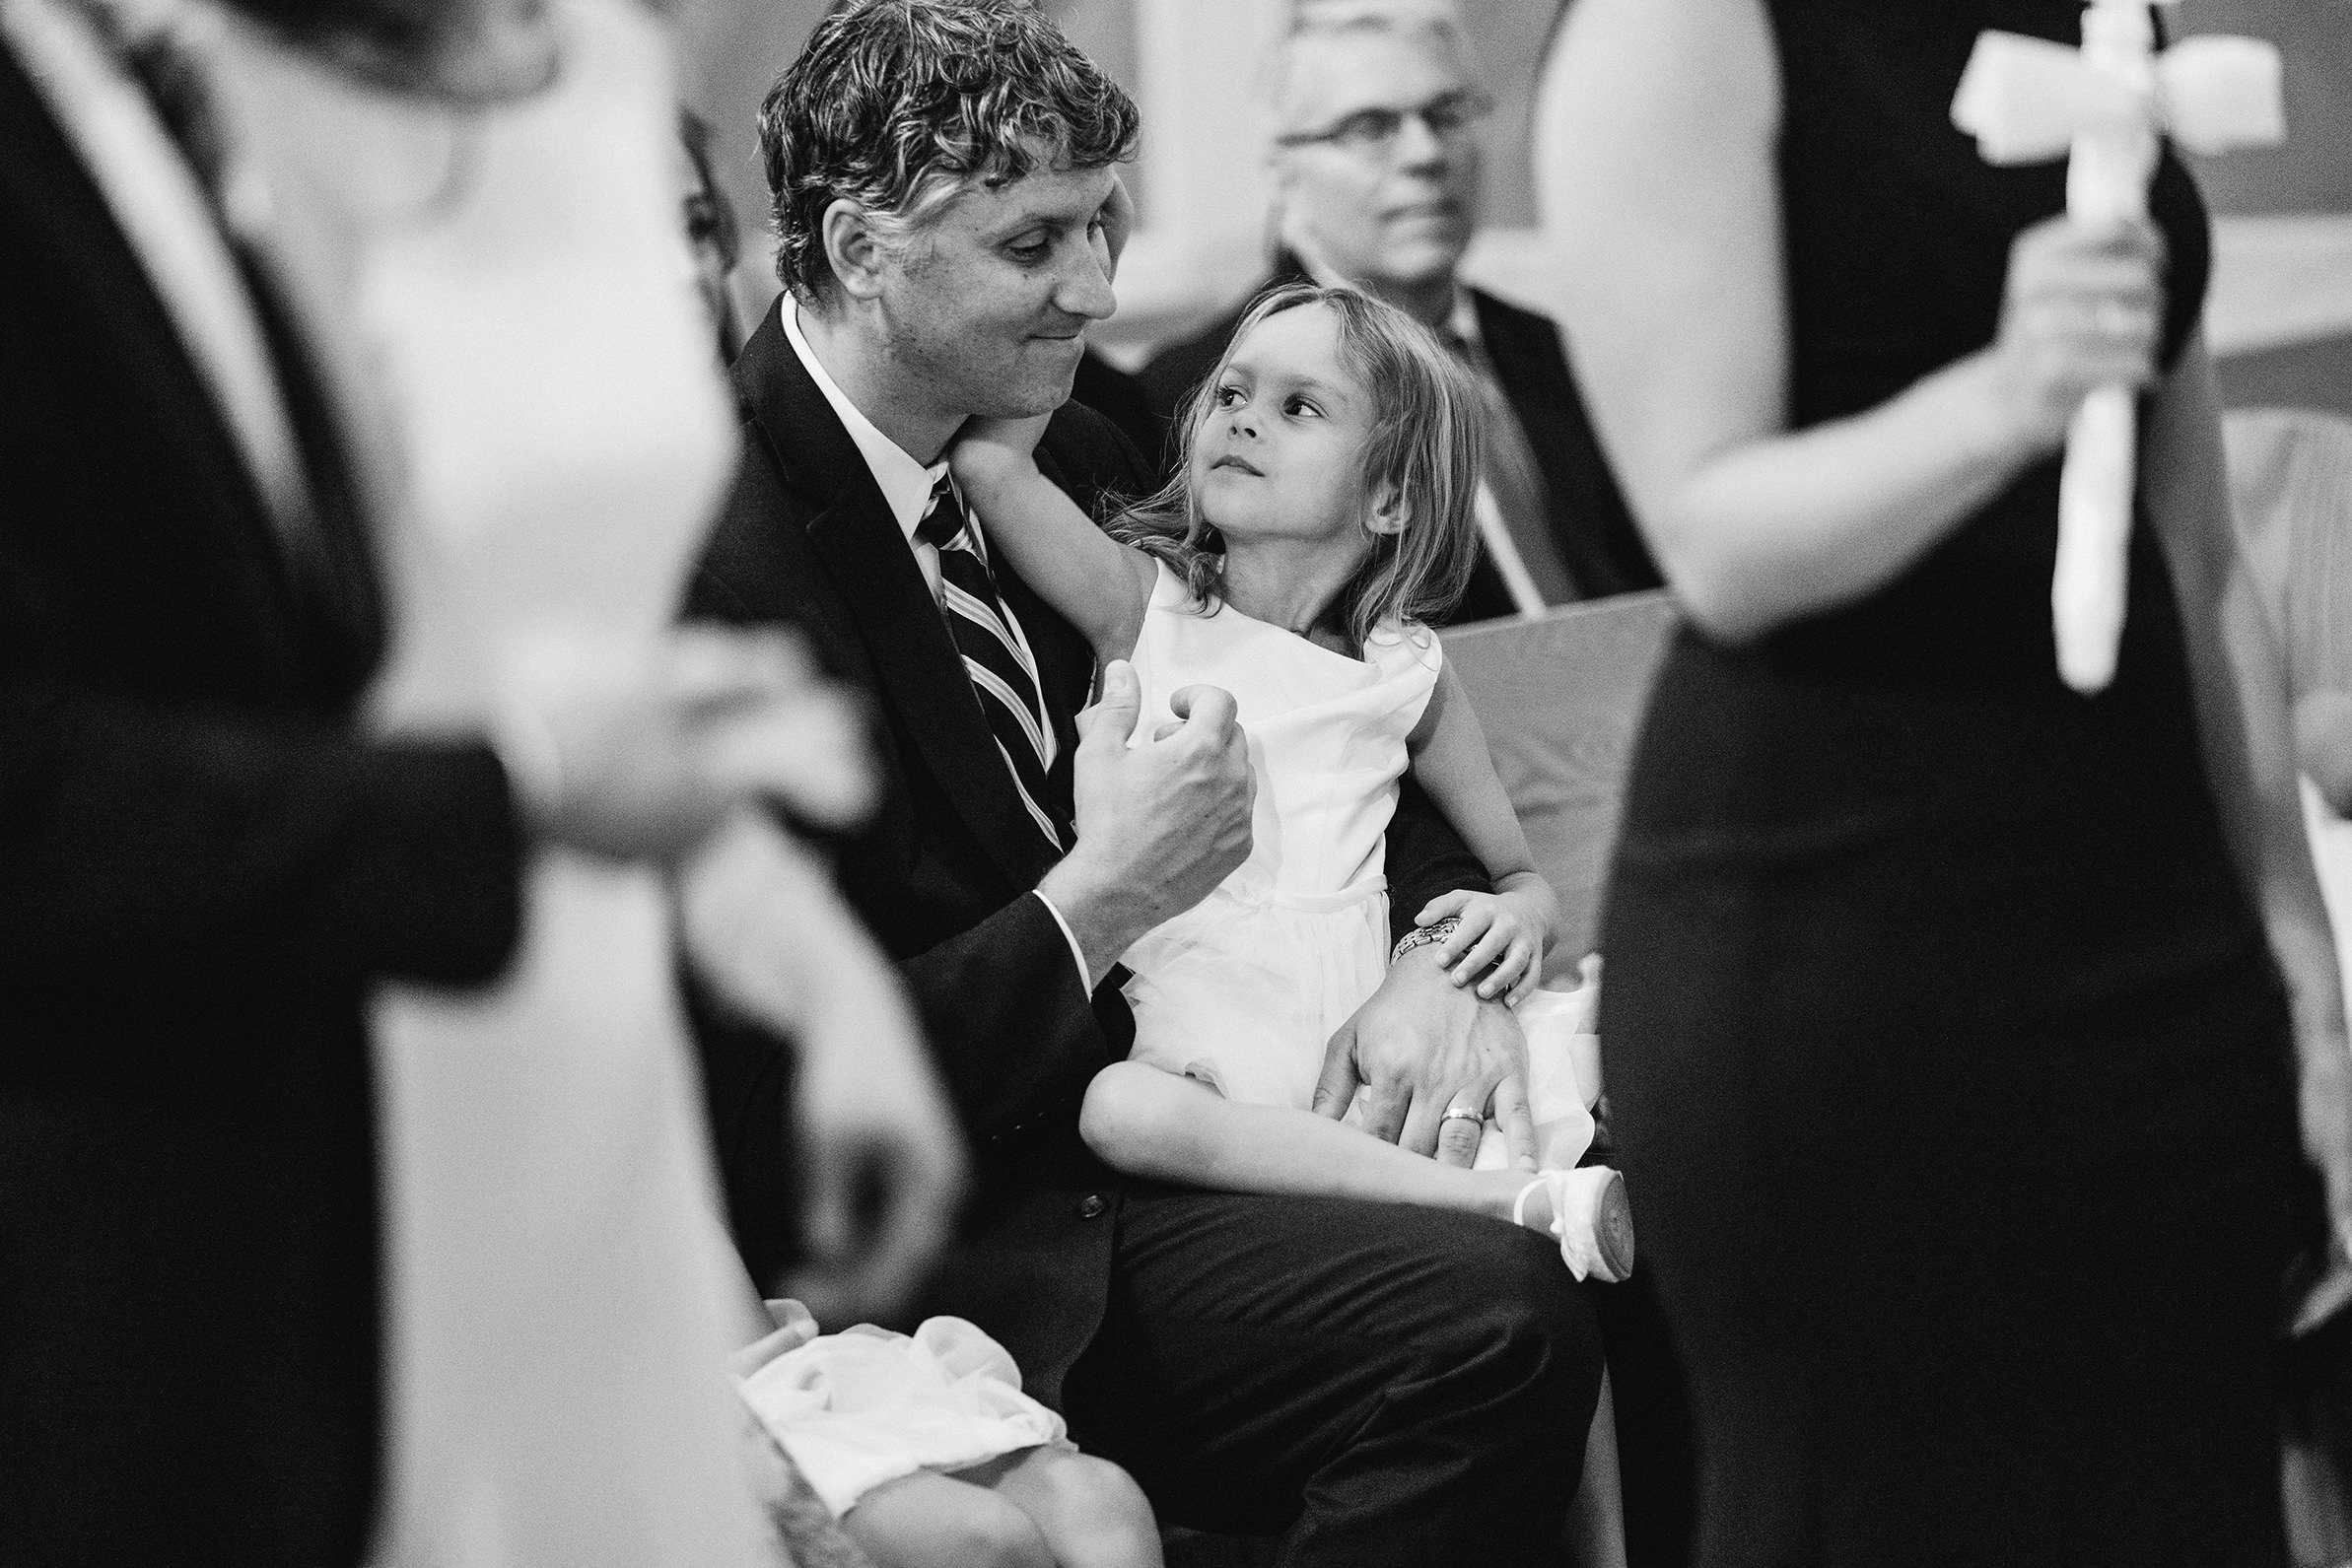 A documentary photograph featured in the best of wedding photography of 2019 showing a little girl playing with dad during a wedding ceremony